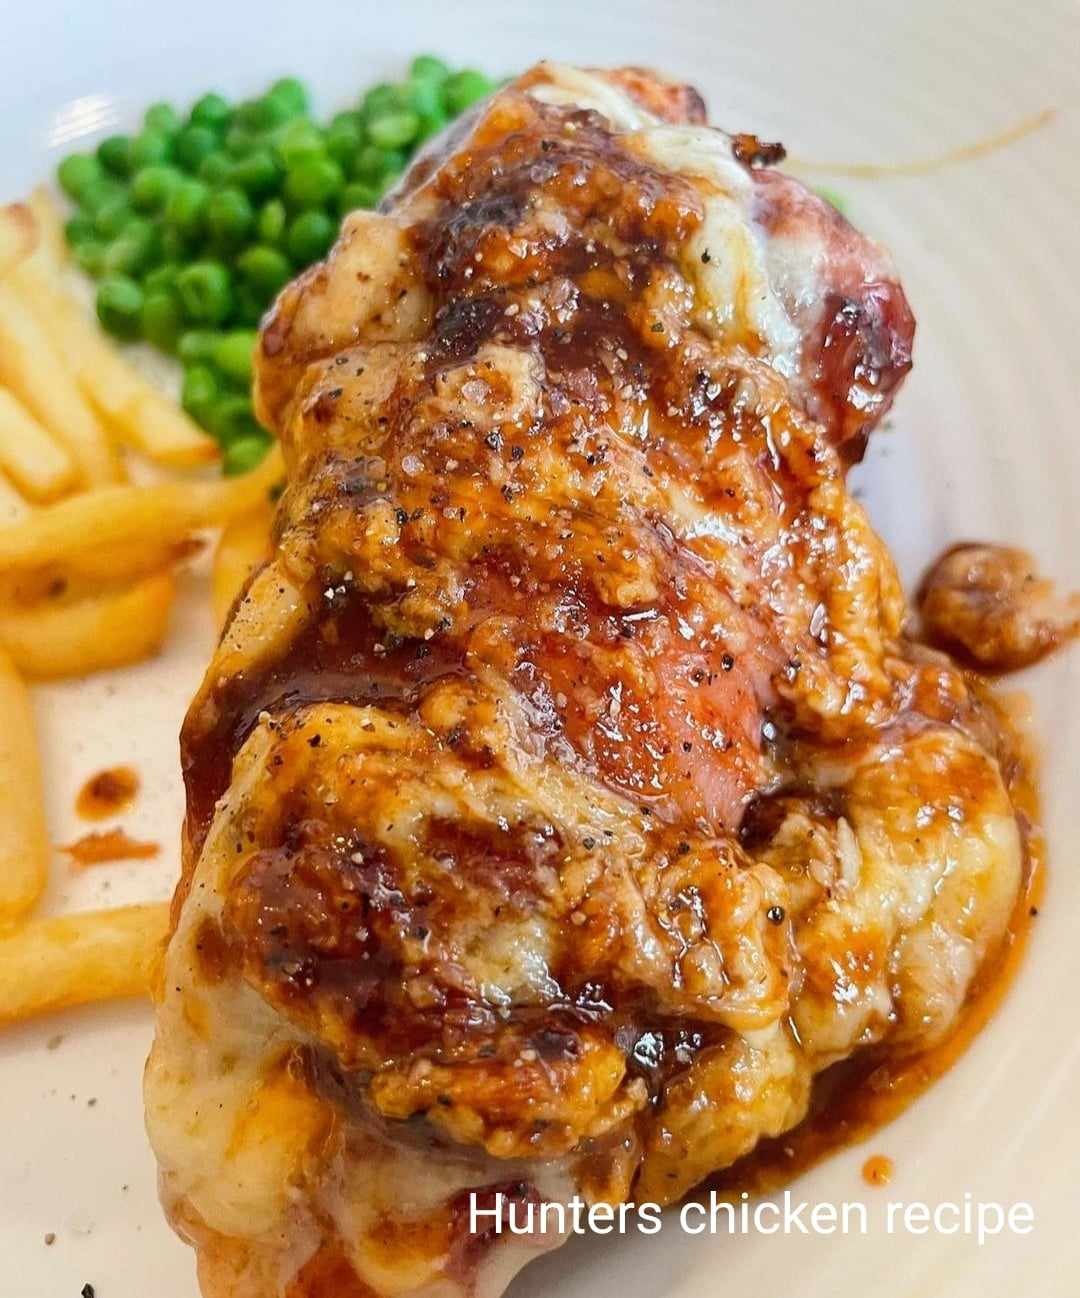 Chicken Hunters Recipe Tonight's dinner is hunter’s chicken I love this quick & easy recipe and it’s a treat for beginners